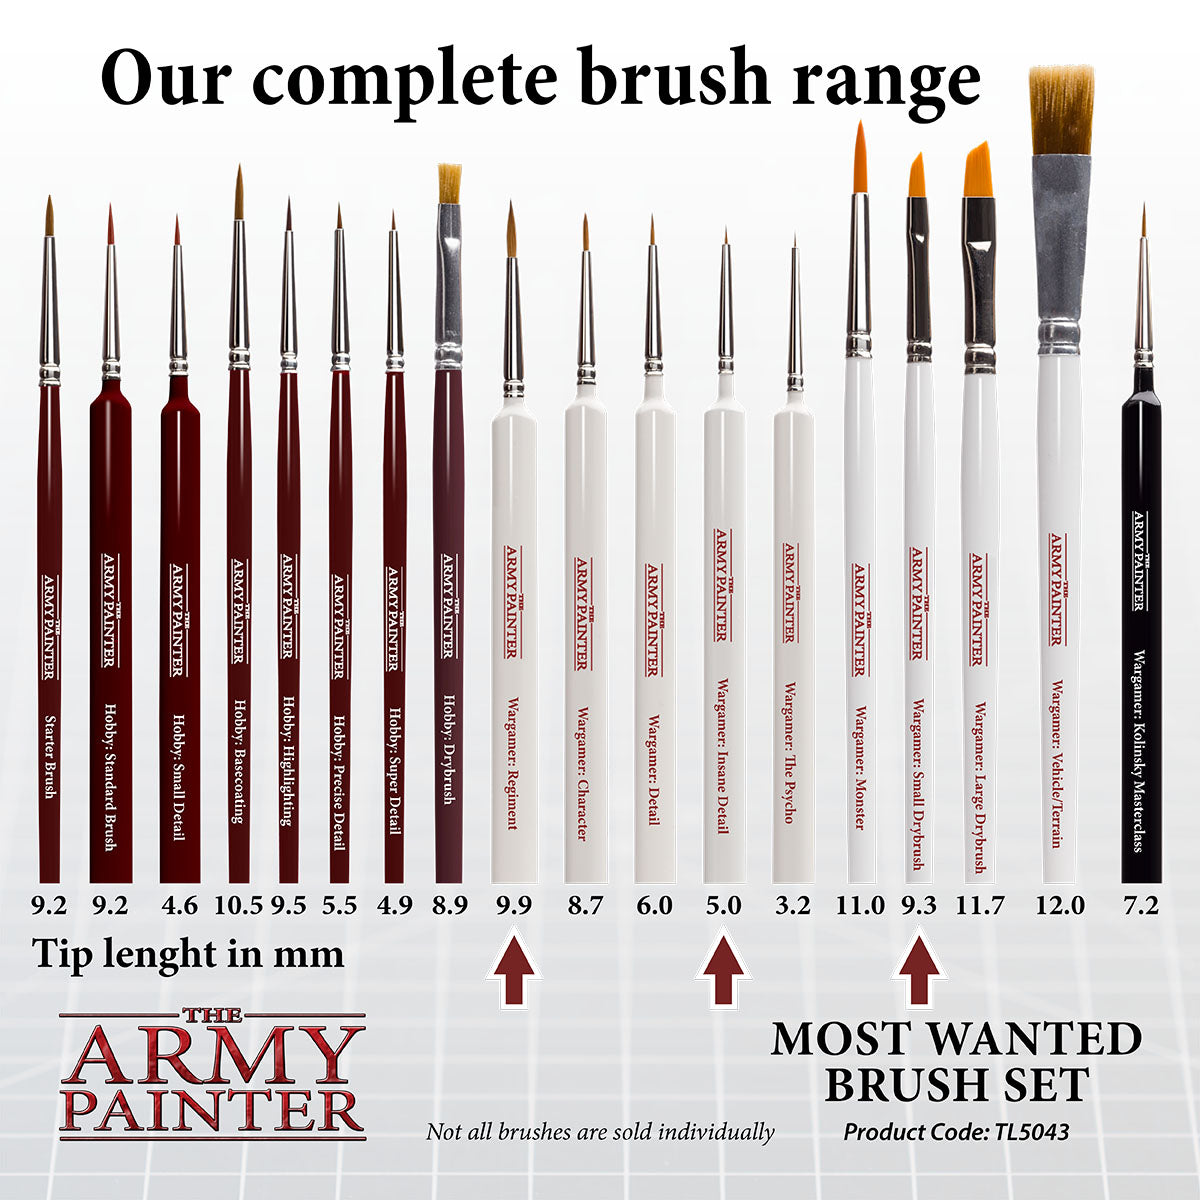 Army Painter Most Wanted Brush Set | The Clever Kobold